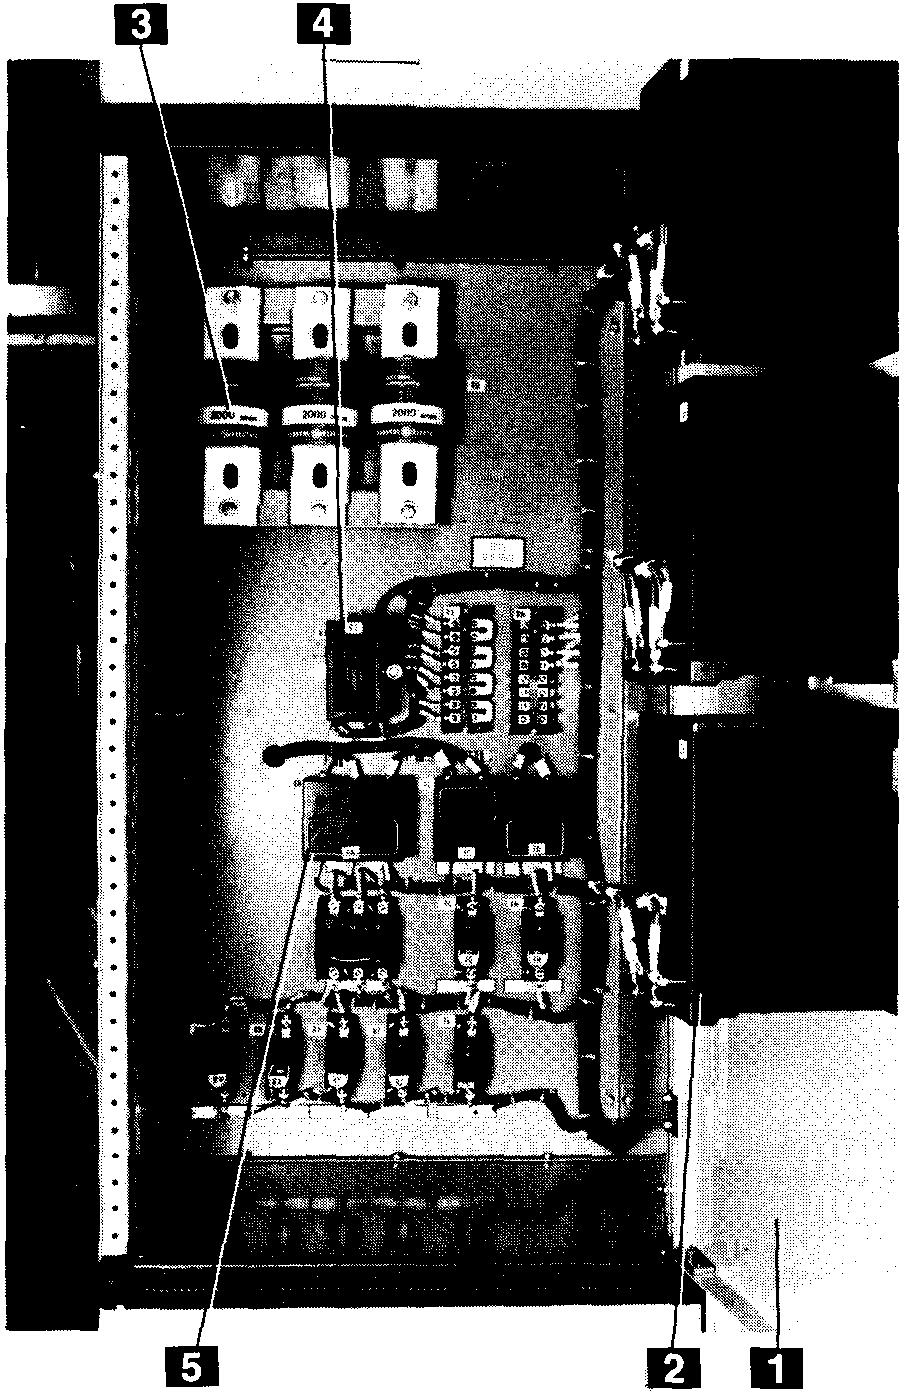 AKD-8 Low-voltage Switchgear SECTON ll-description Figure 3-21 illustrates an auxiliary/transition compartment with switchgear-type relays mounted in semi-flush draw-out cases (2) installed on the